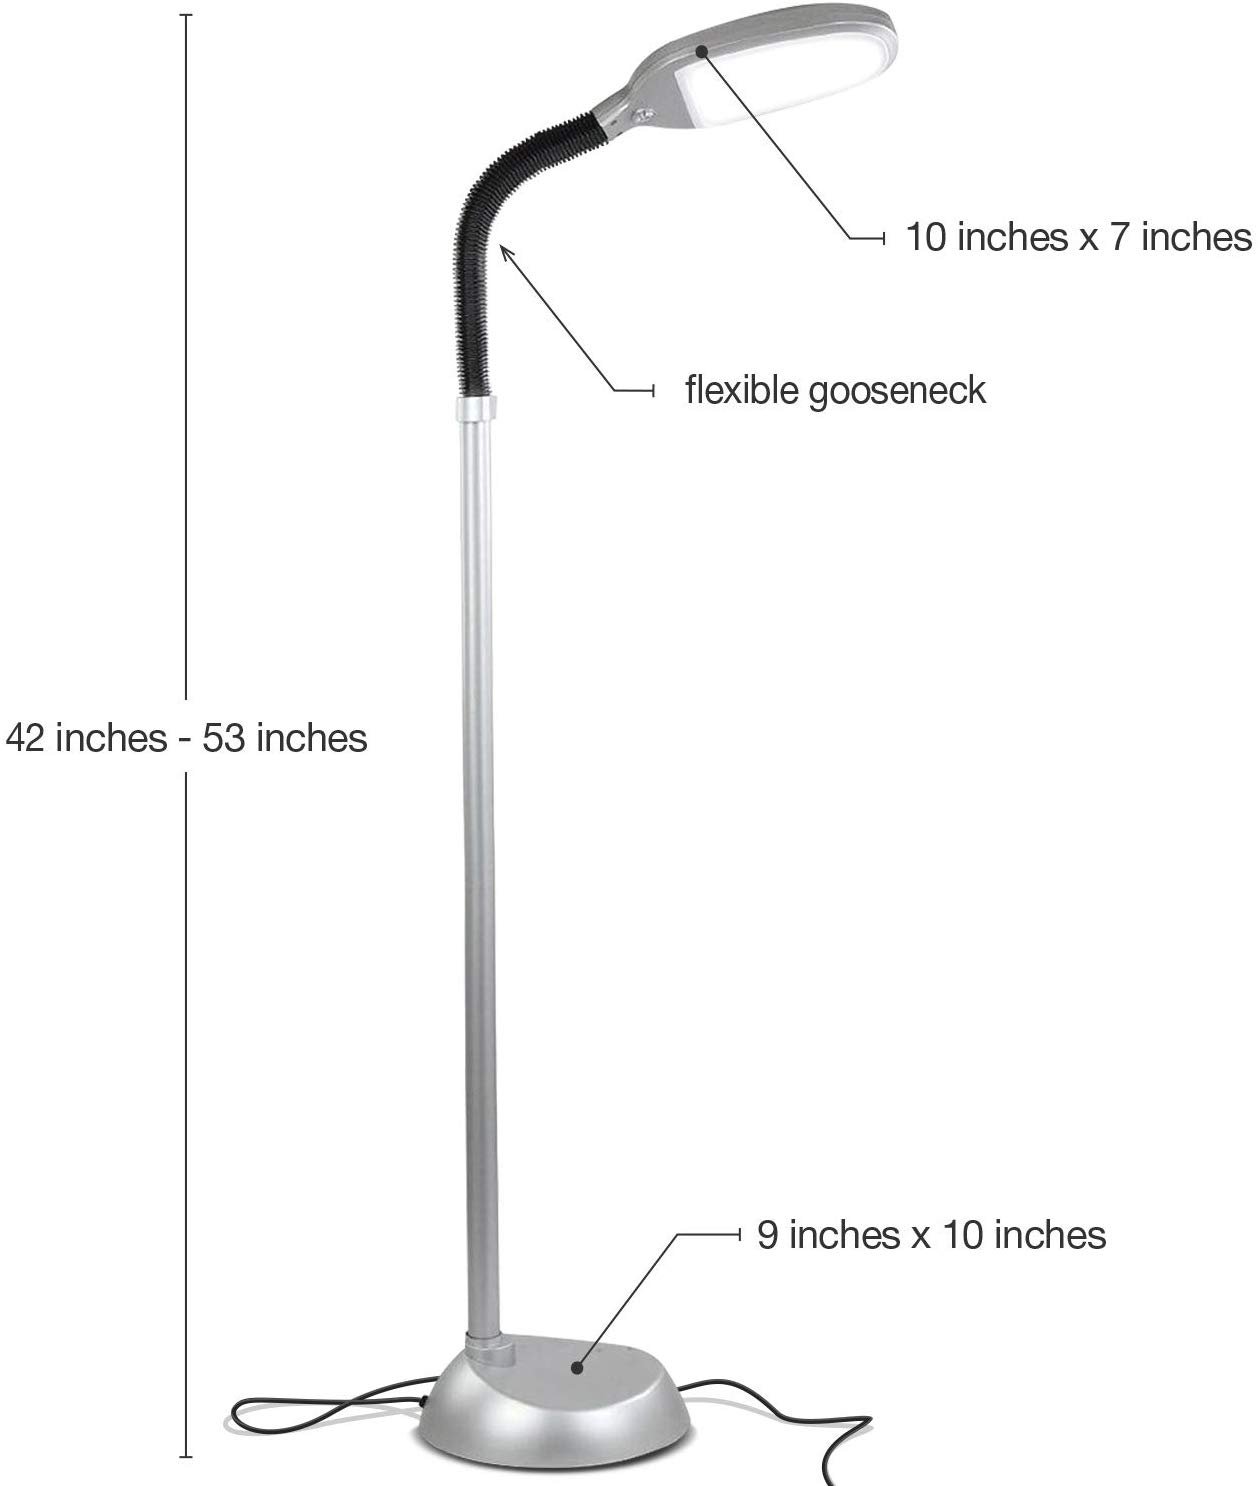 rightech Litespan LED Bright Reading and Craft Floor Lamp